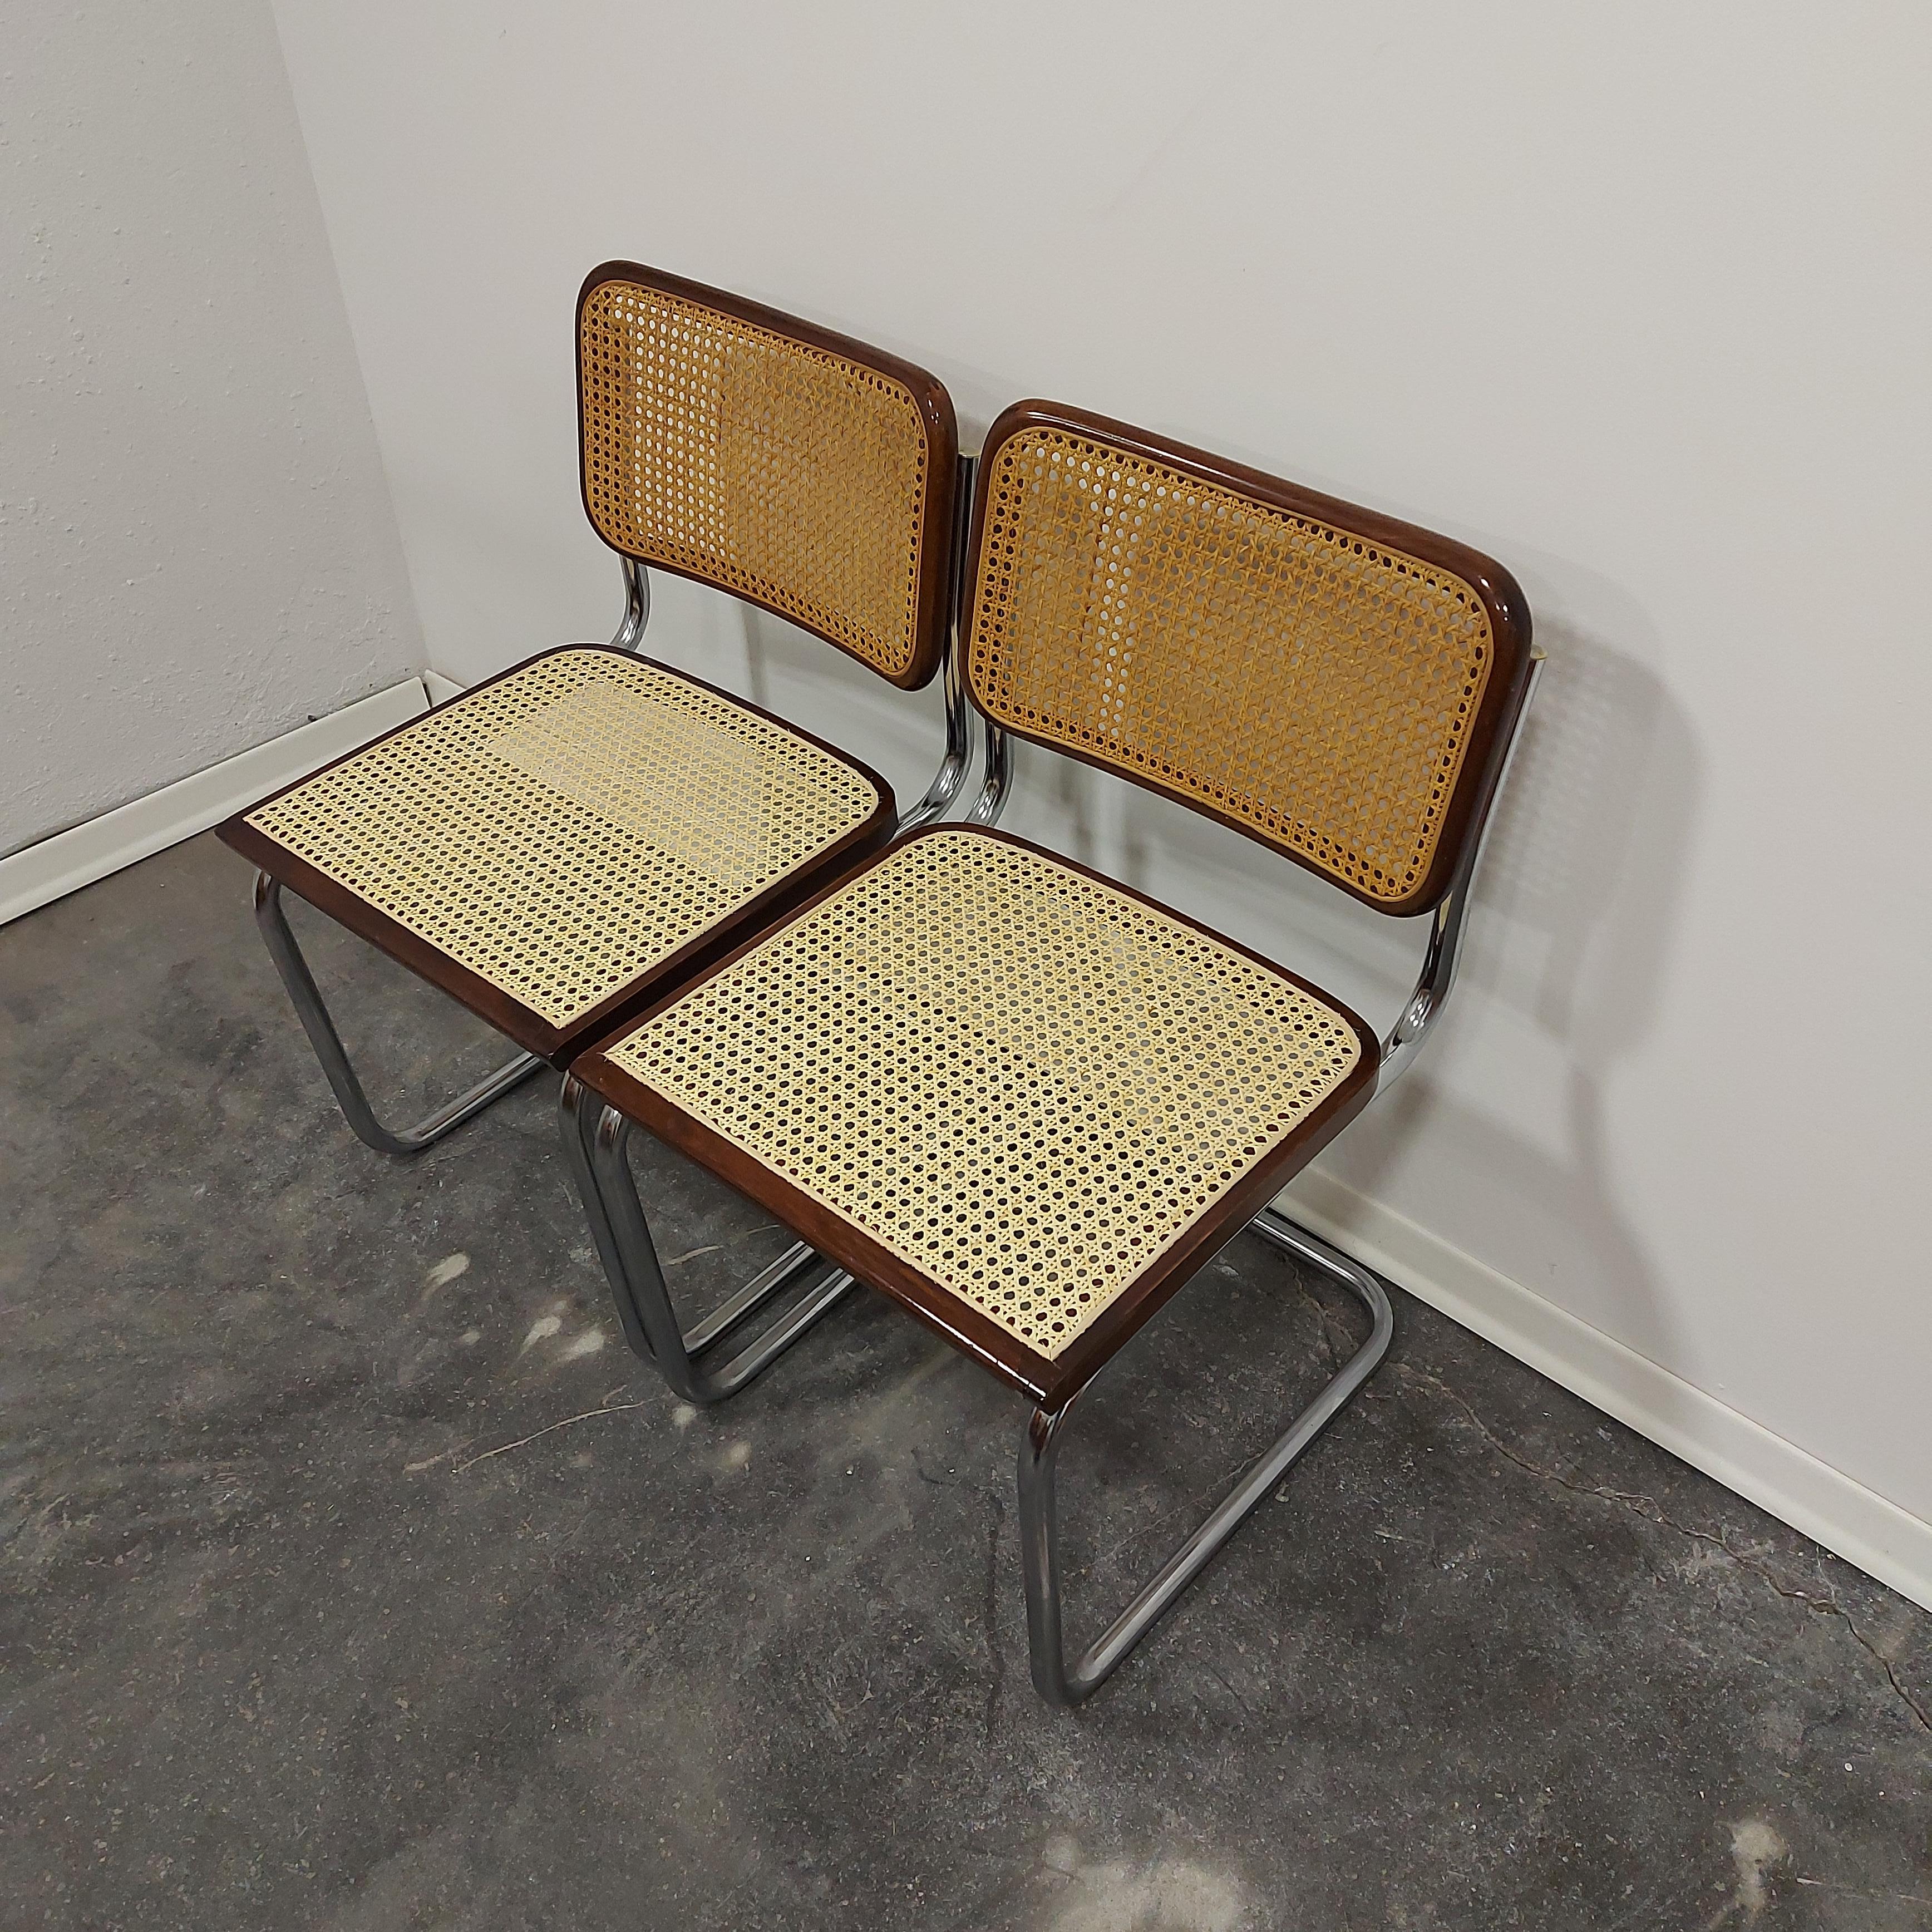 Cesca chair, 1980s

Designer Marcel Breuer
Country of producer: Italy
Design Period: 1920 to 1949
Production Period: 1980s
Style: Mid-Century, Classic, Modern

Detailed Condition: This vintage item is in good vintage condition. All chairs have new